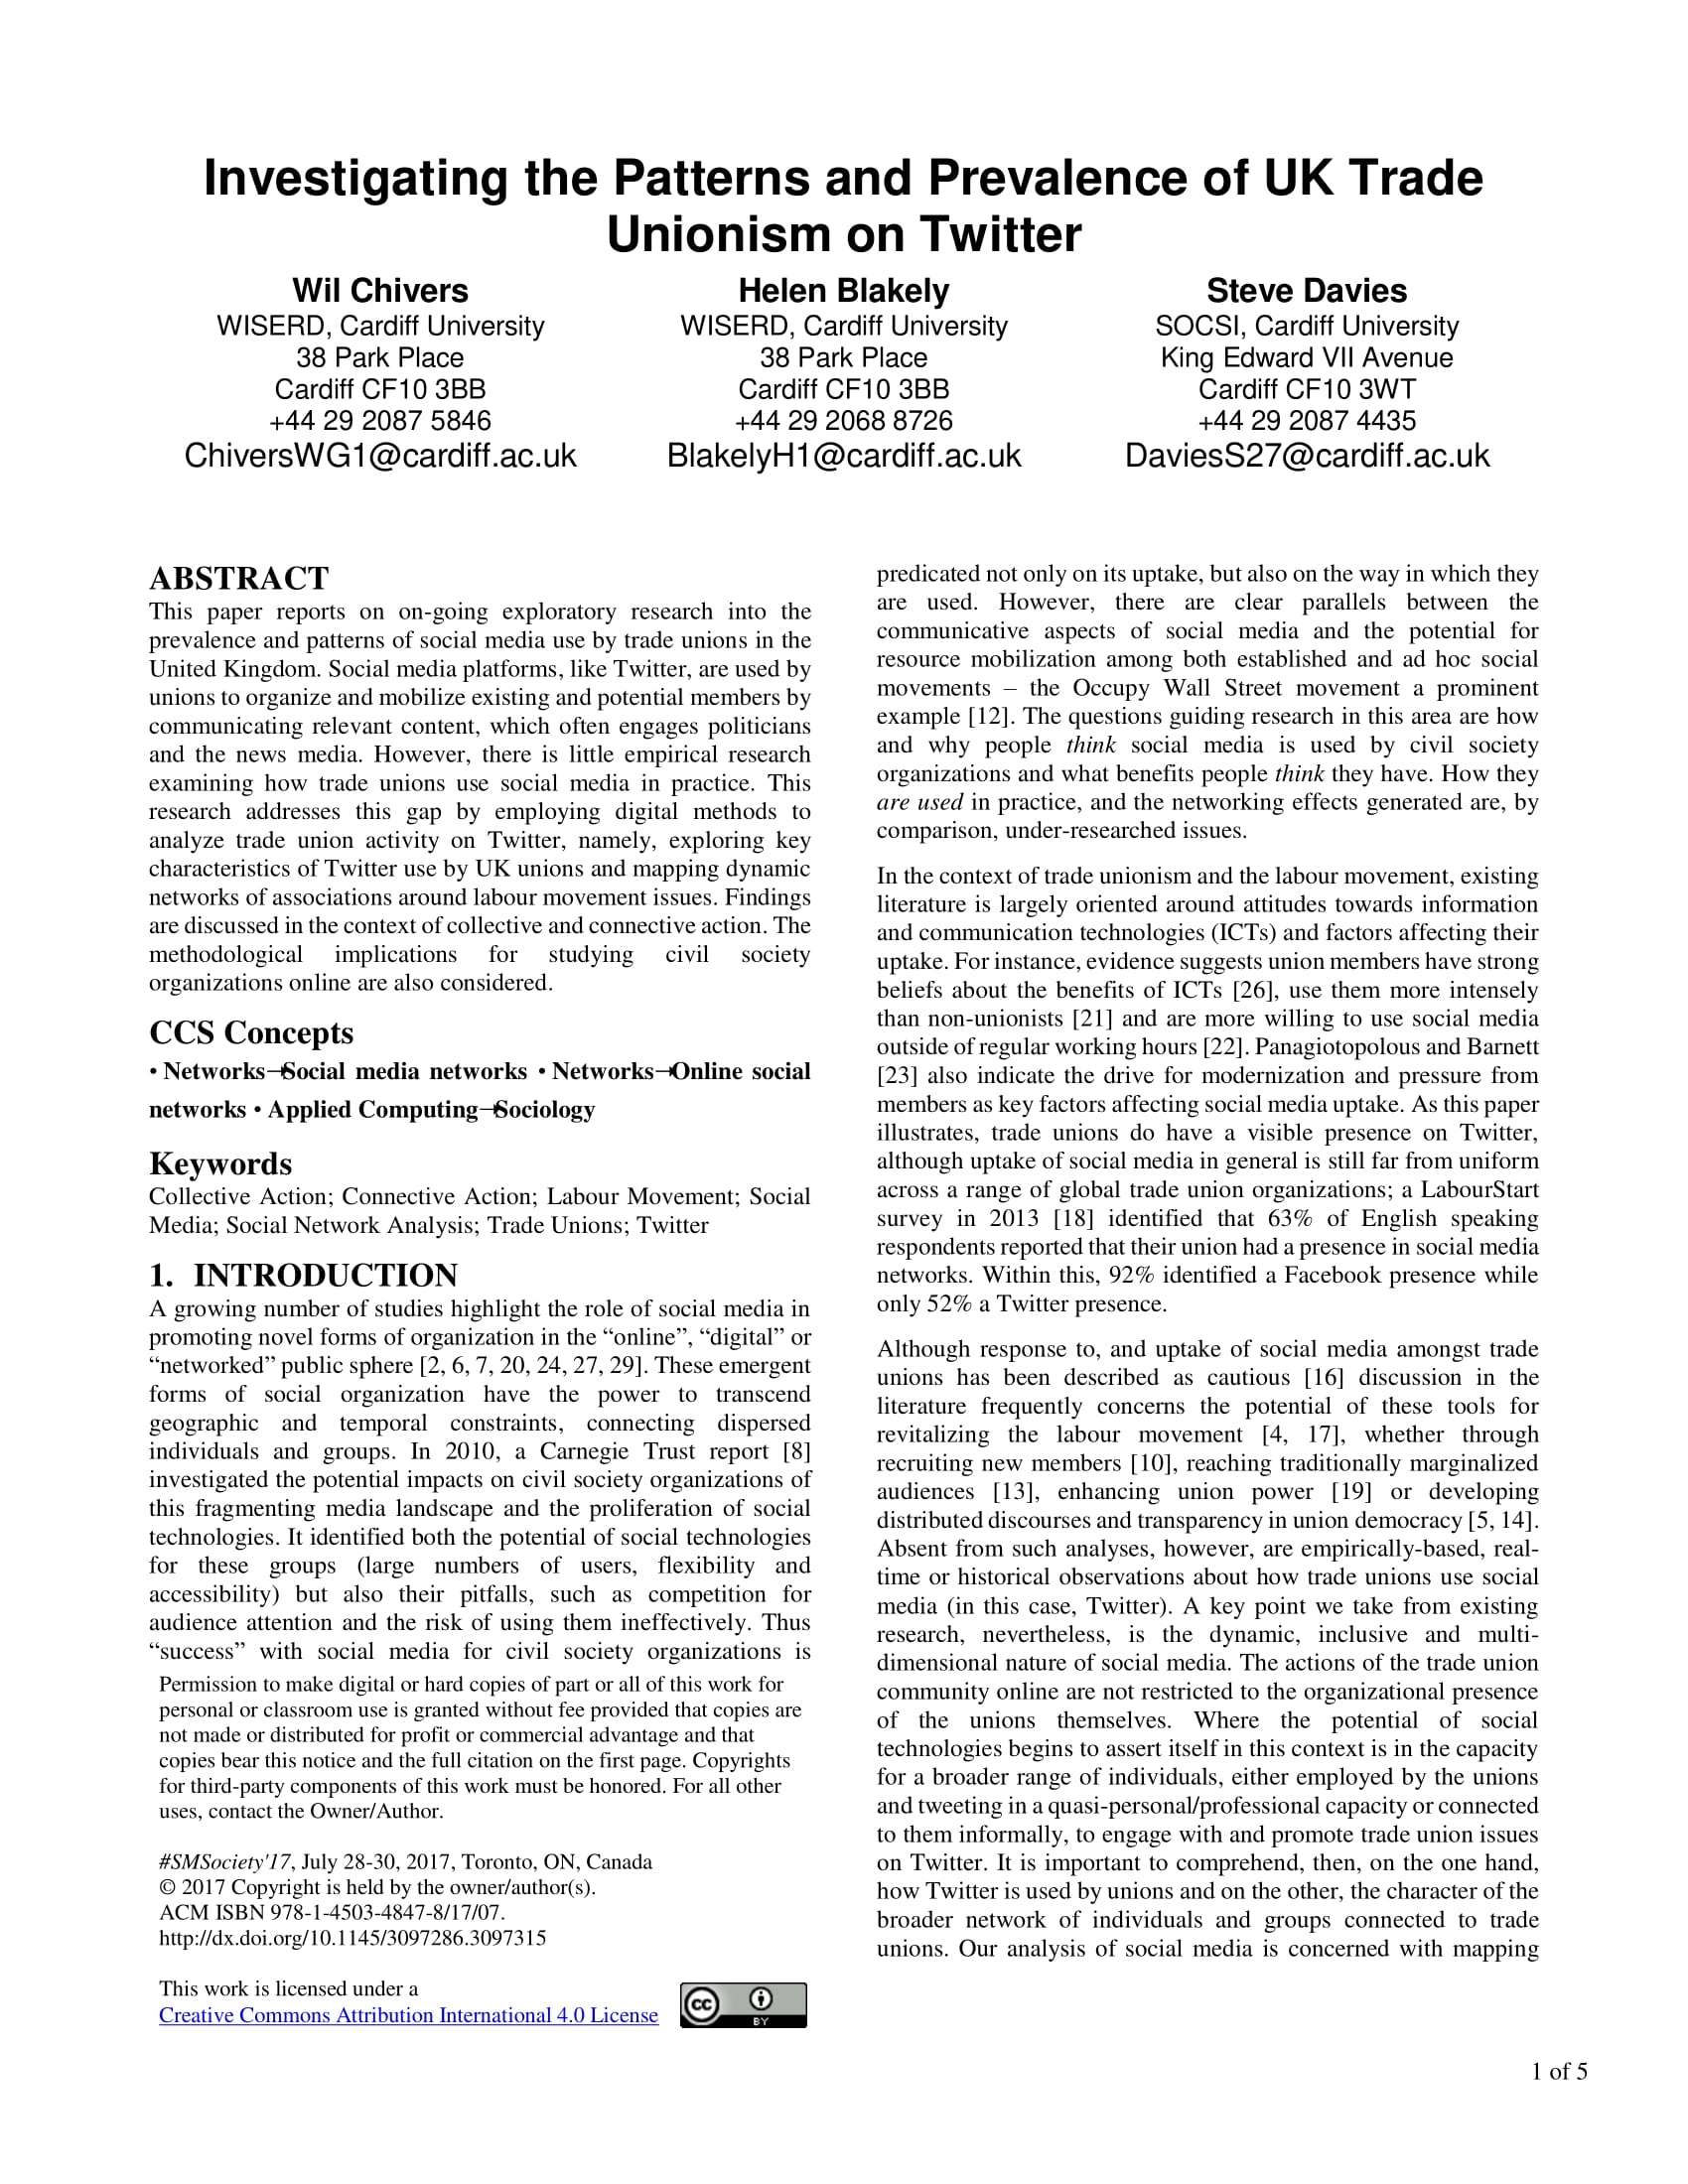 Cover of articles